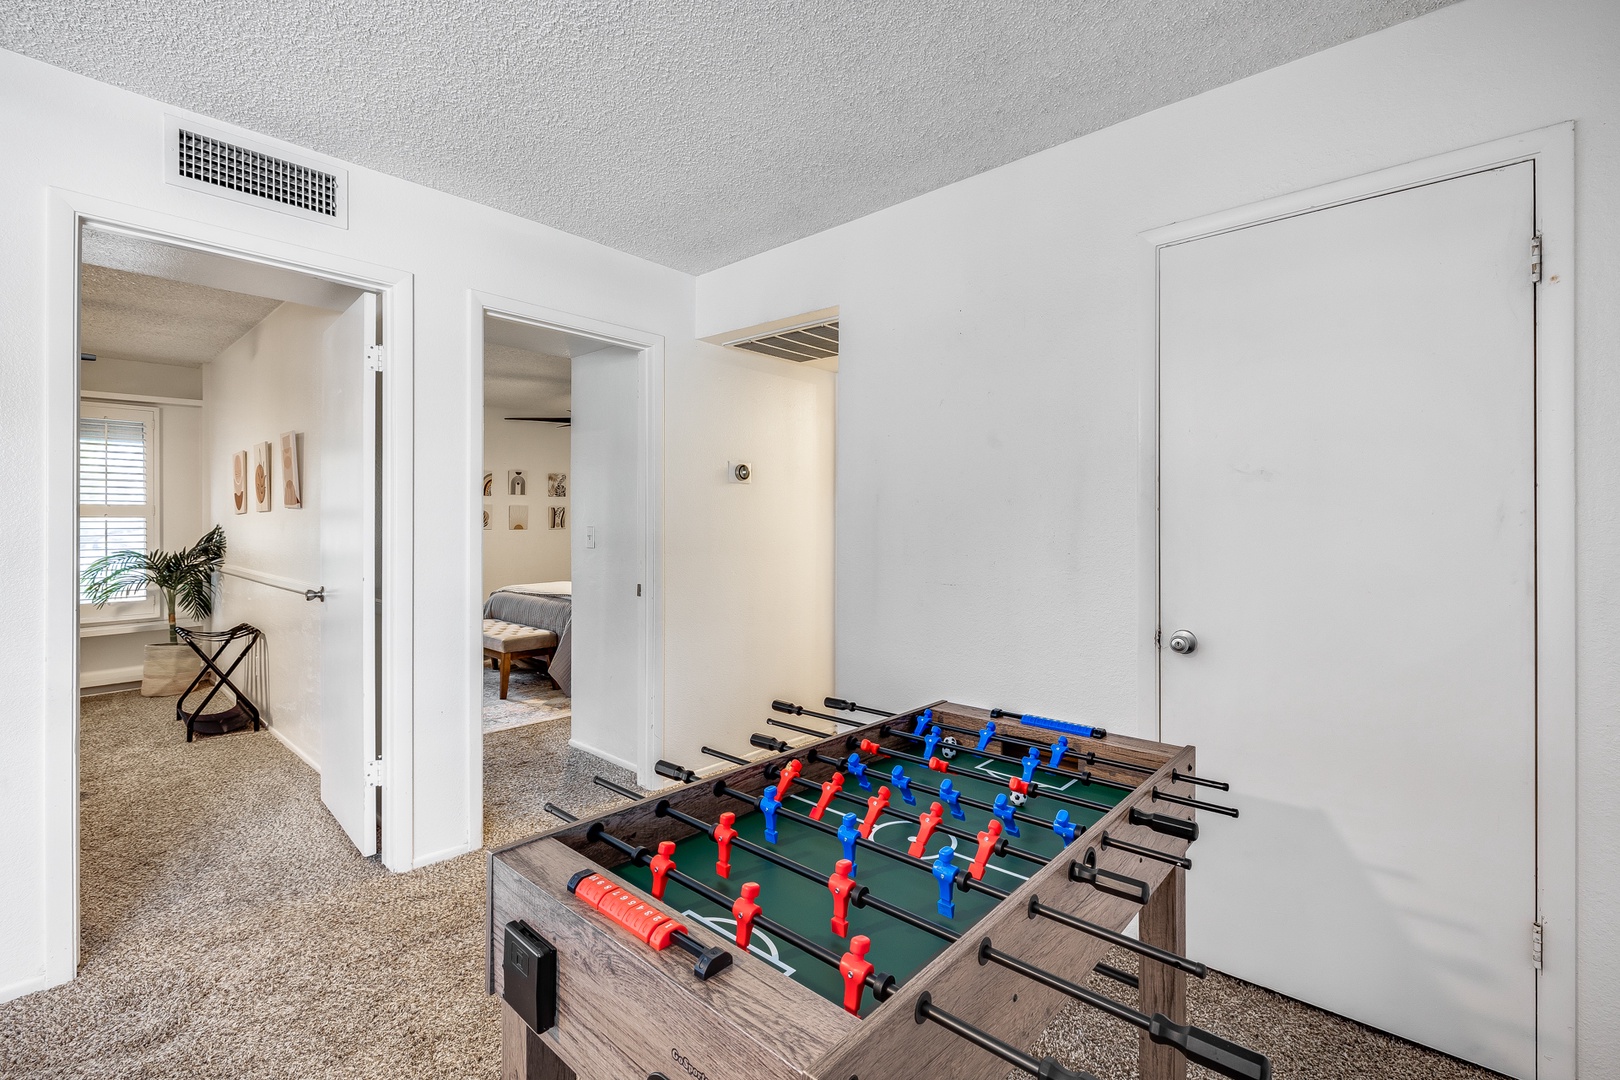 Glendale Vacation Rentals, Condo at the Bell Air - Challenge someone to a competitive game of foosball